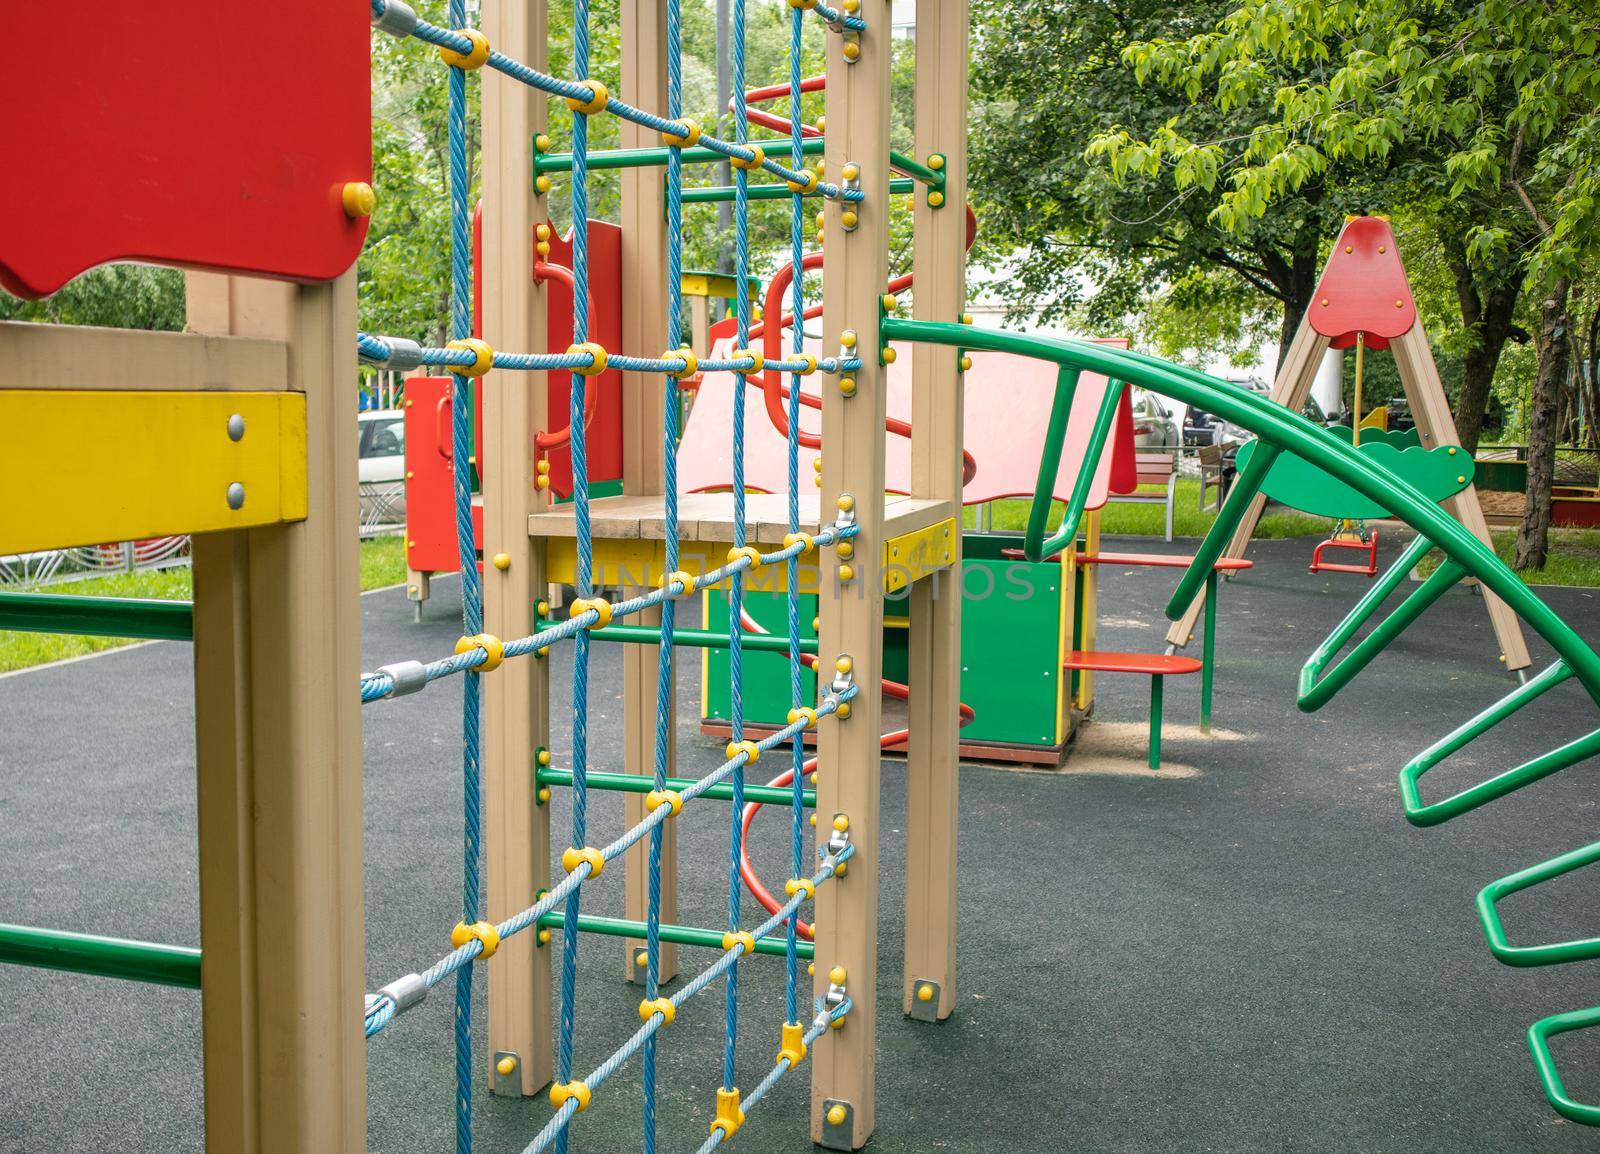 Modern Children's Outdoor Sports Play Complex with Slide, Rope Wall.